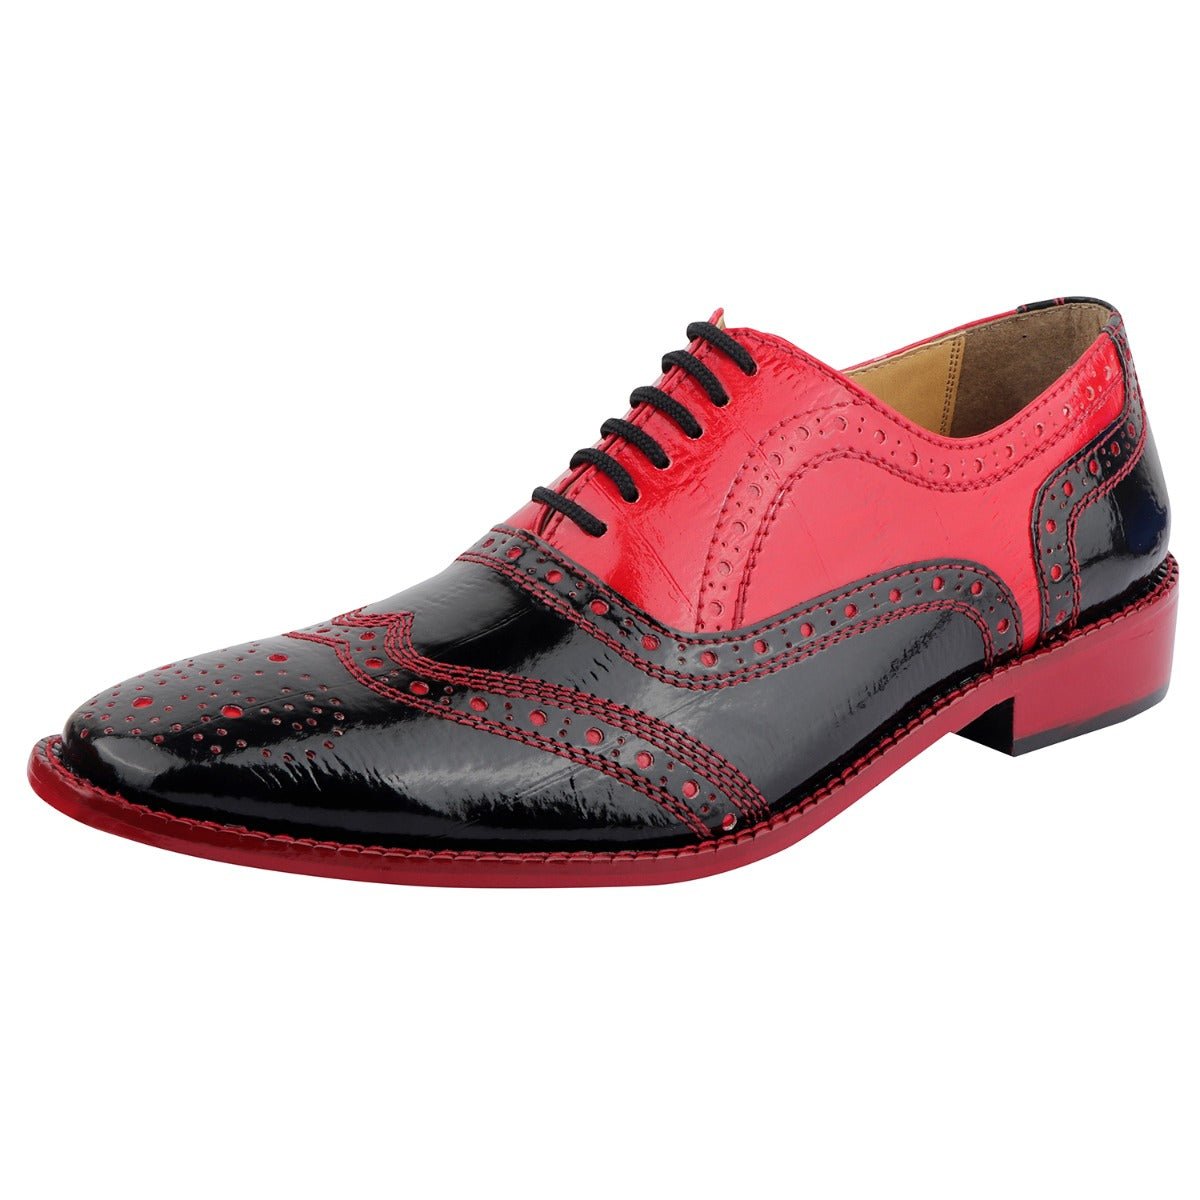 LIBERTYZENO Tremont Man Made Oxford Style Dress Shoes - Red - 10.5